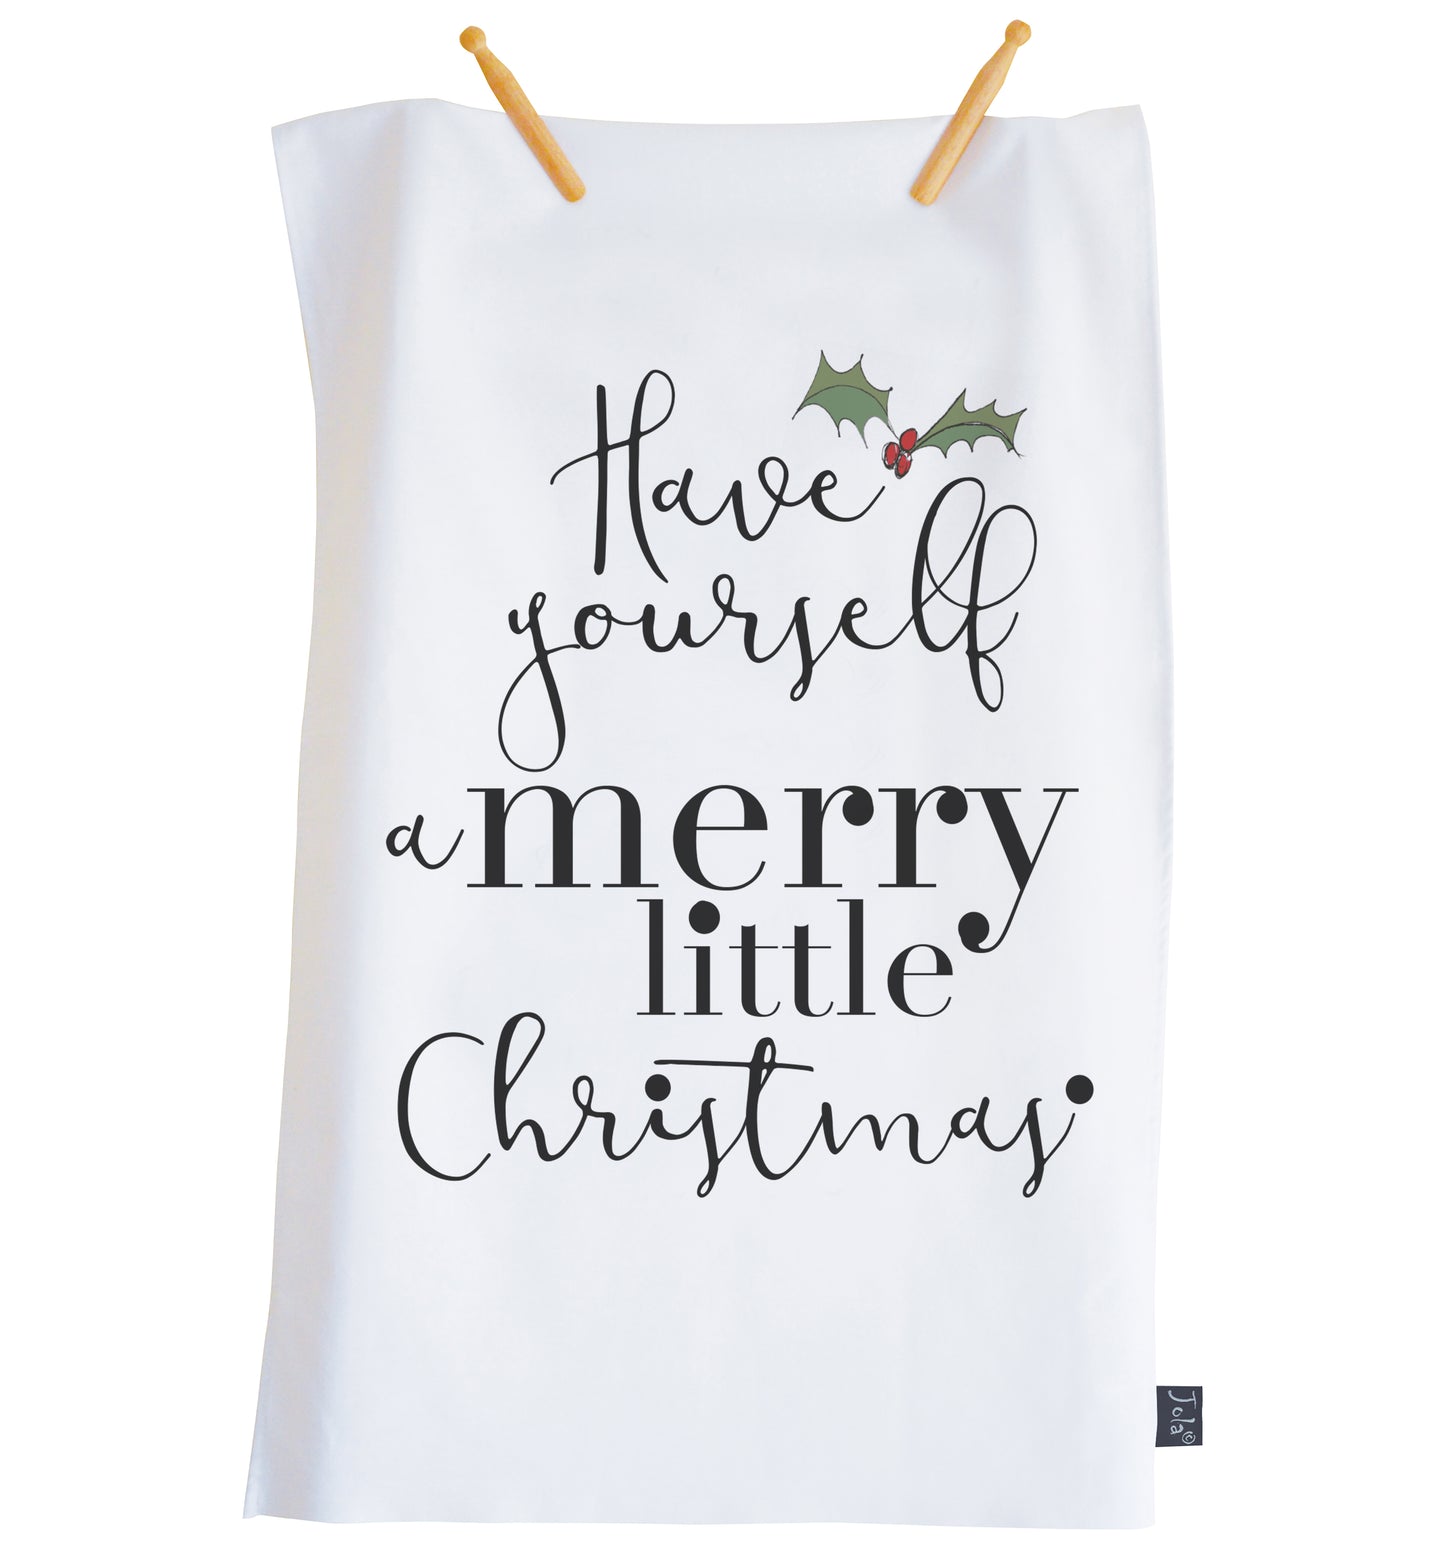 Have yourself a Merry Christmas tea towel